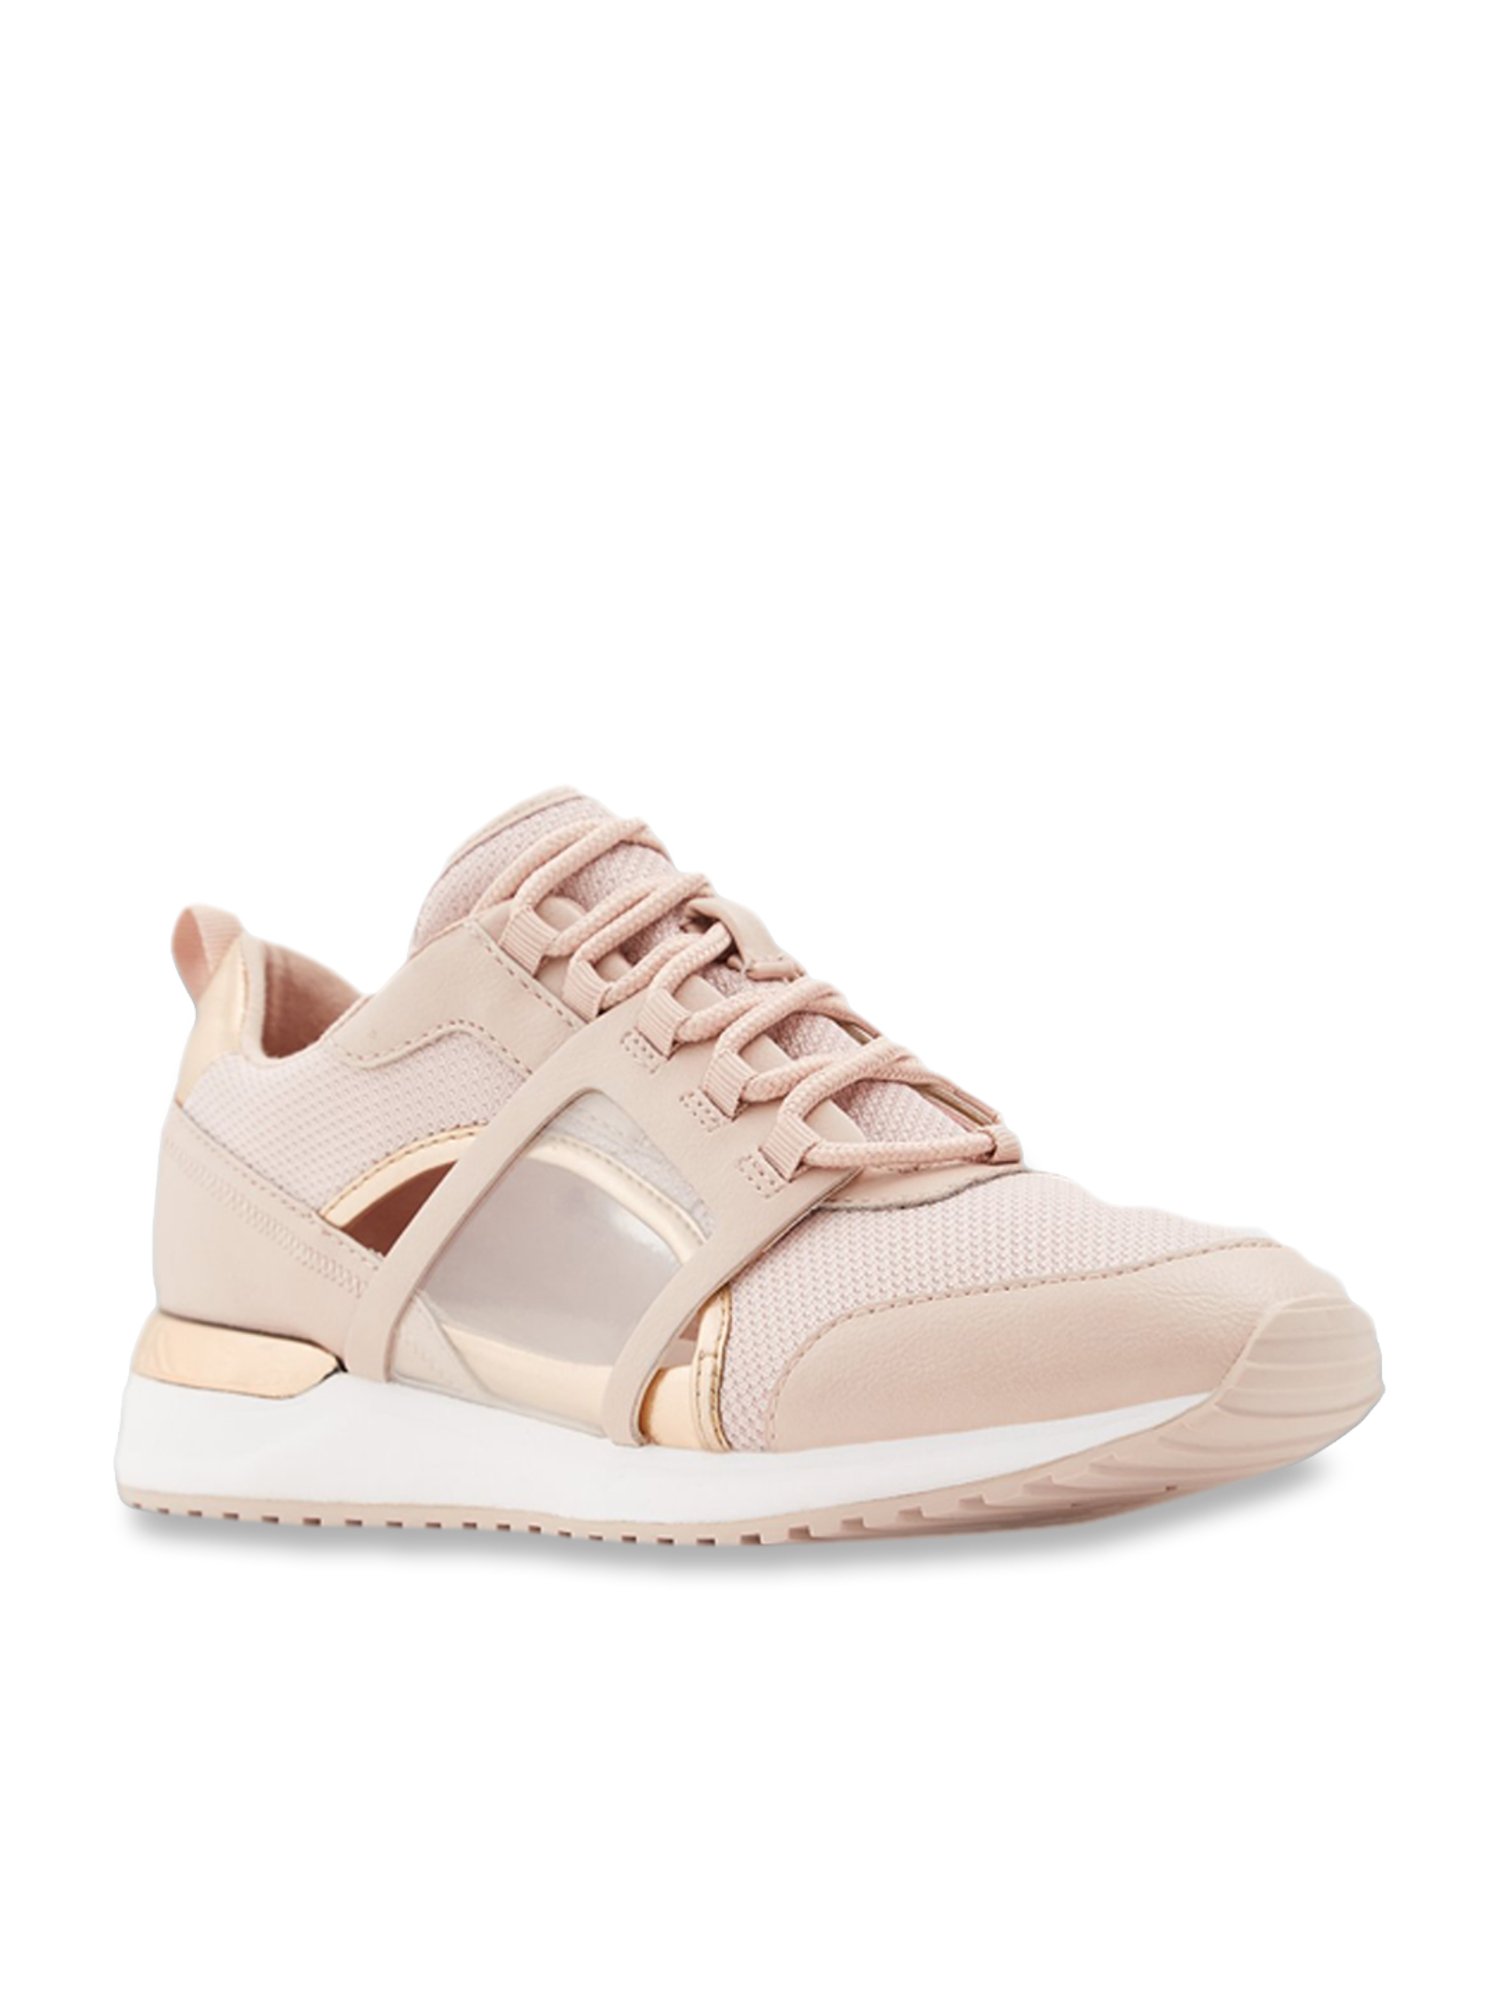 Aldo Blush Pink Casual Sneakers from 